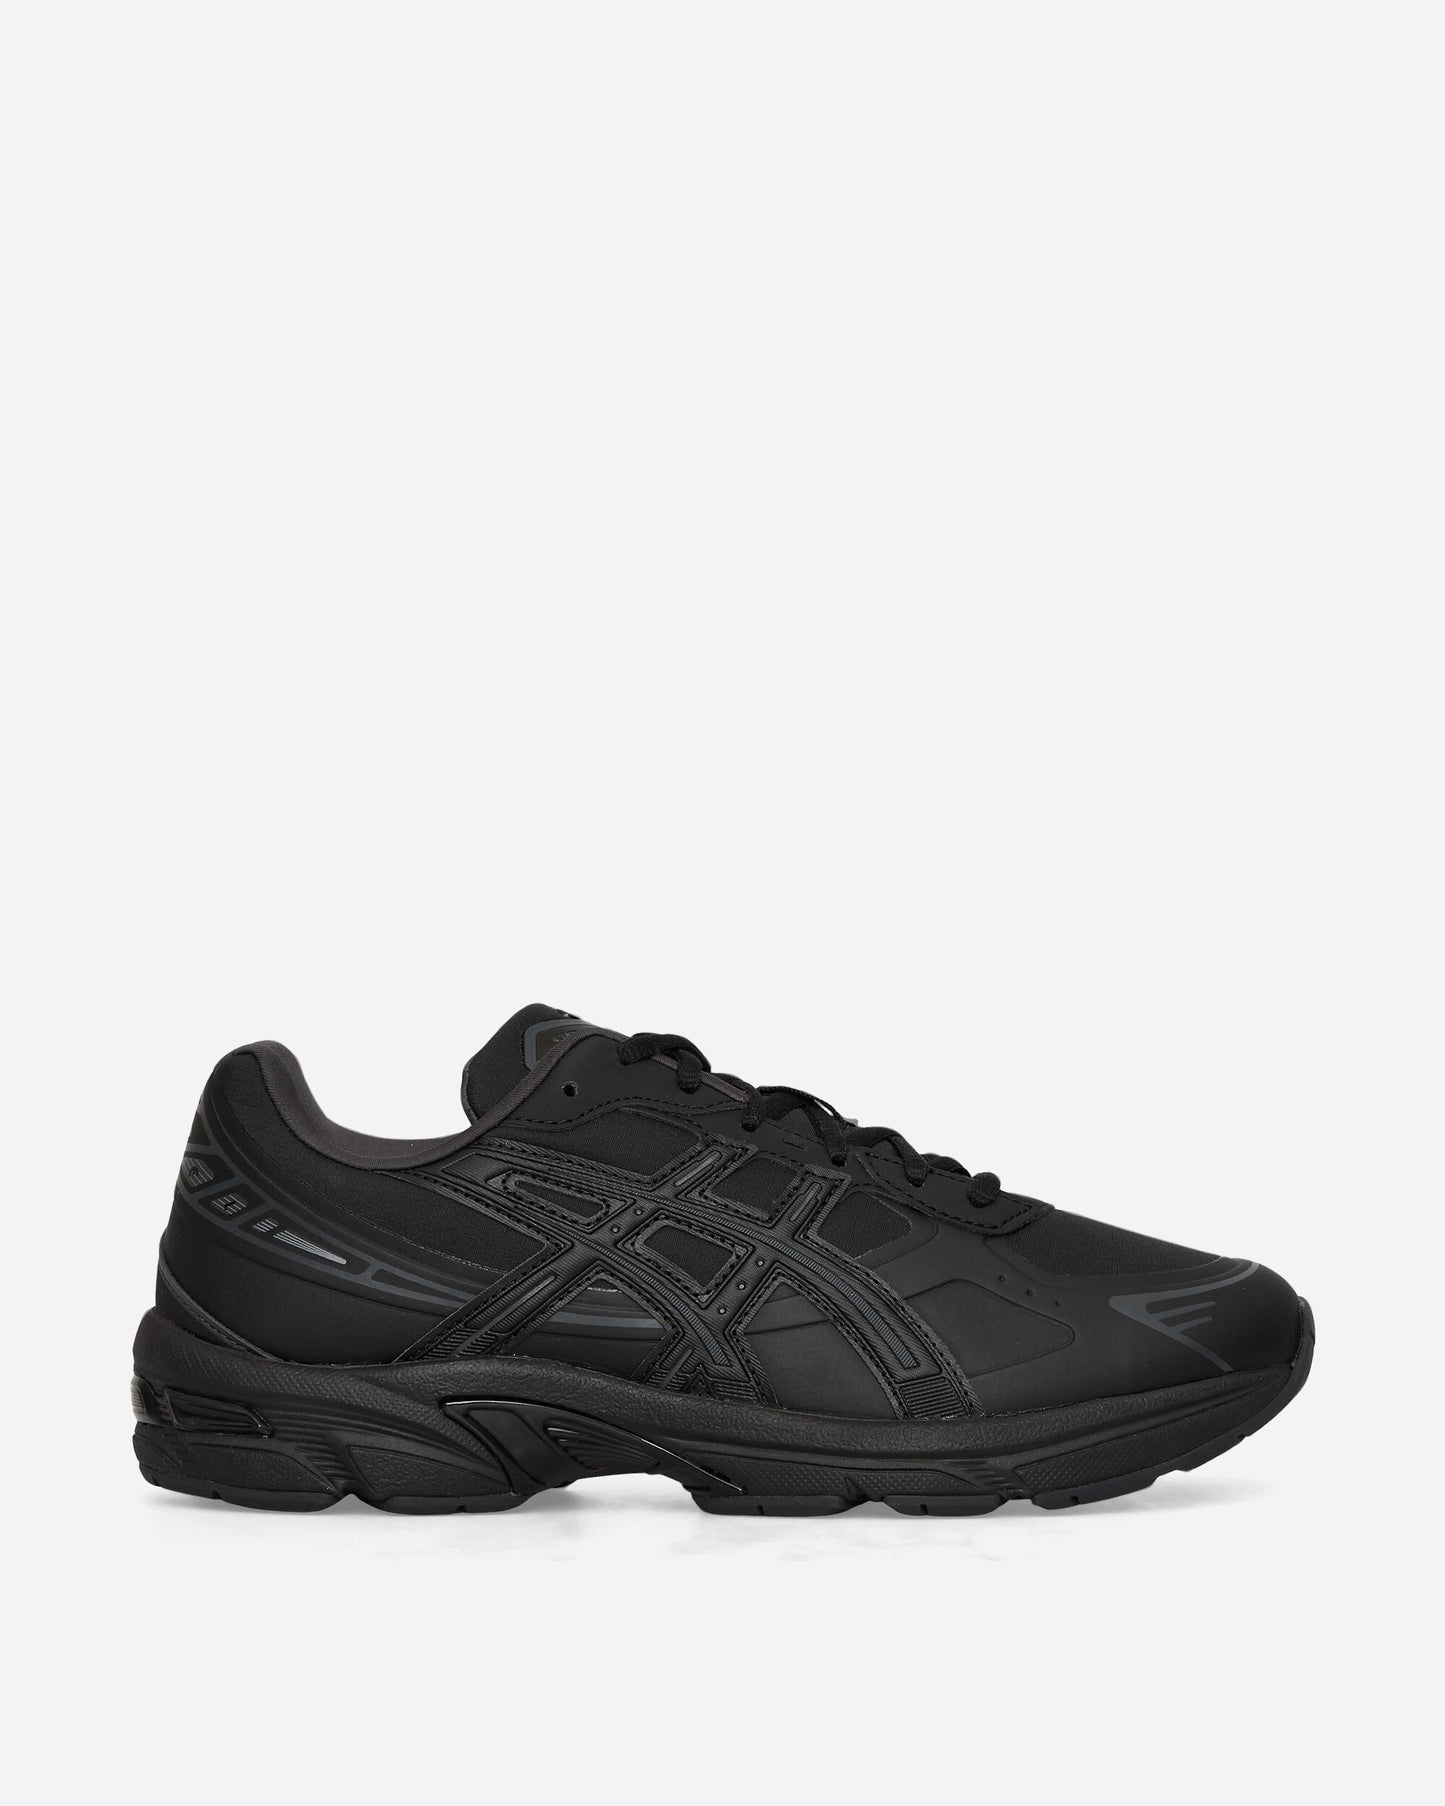 Asics Gel-1130 Ns Black/Graphite Grey Sneakers Low 1203A413-001